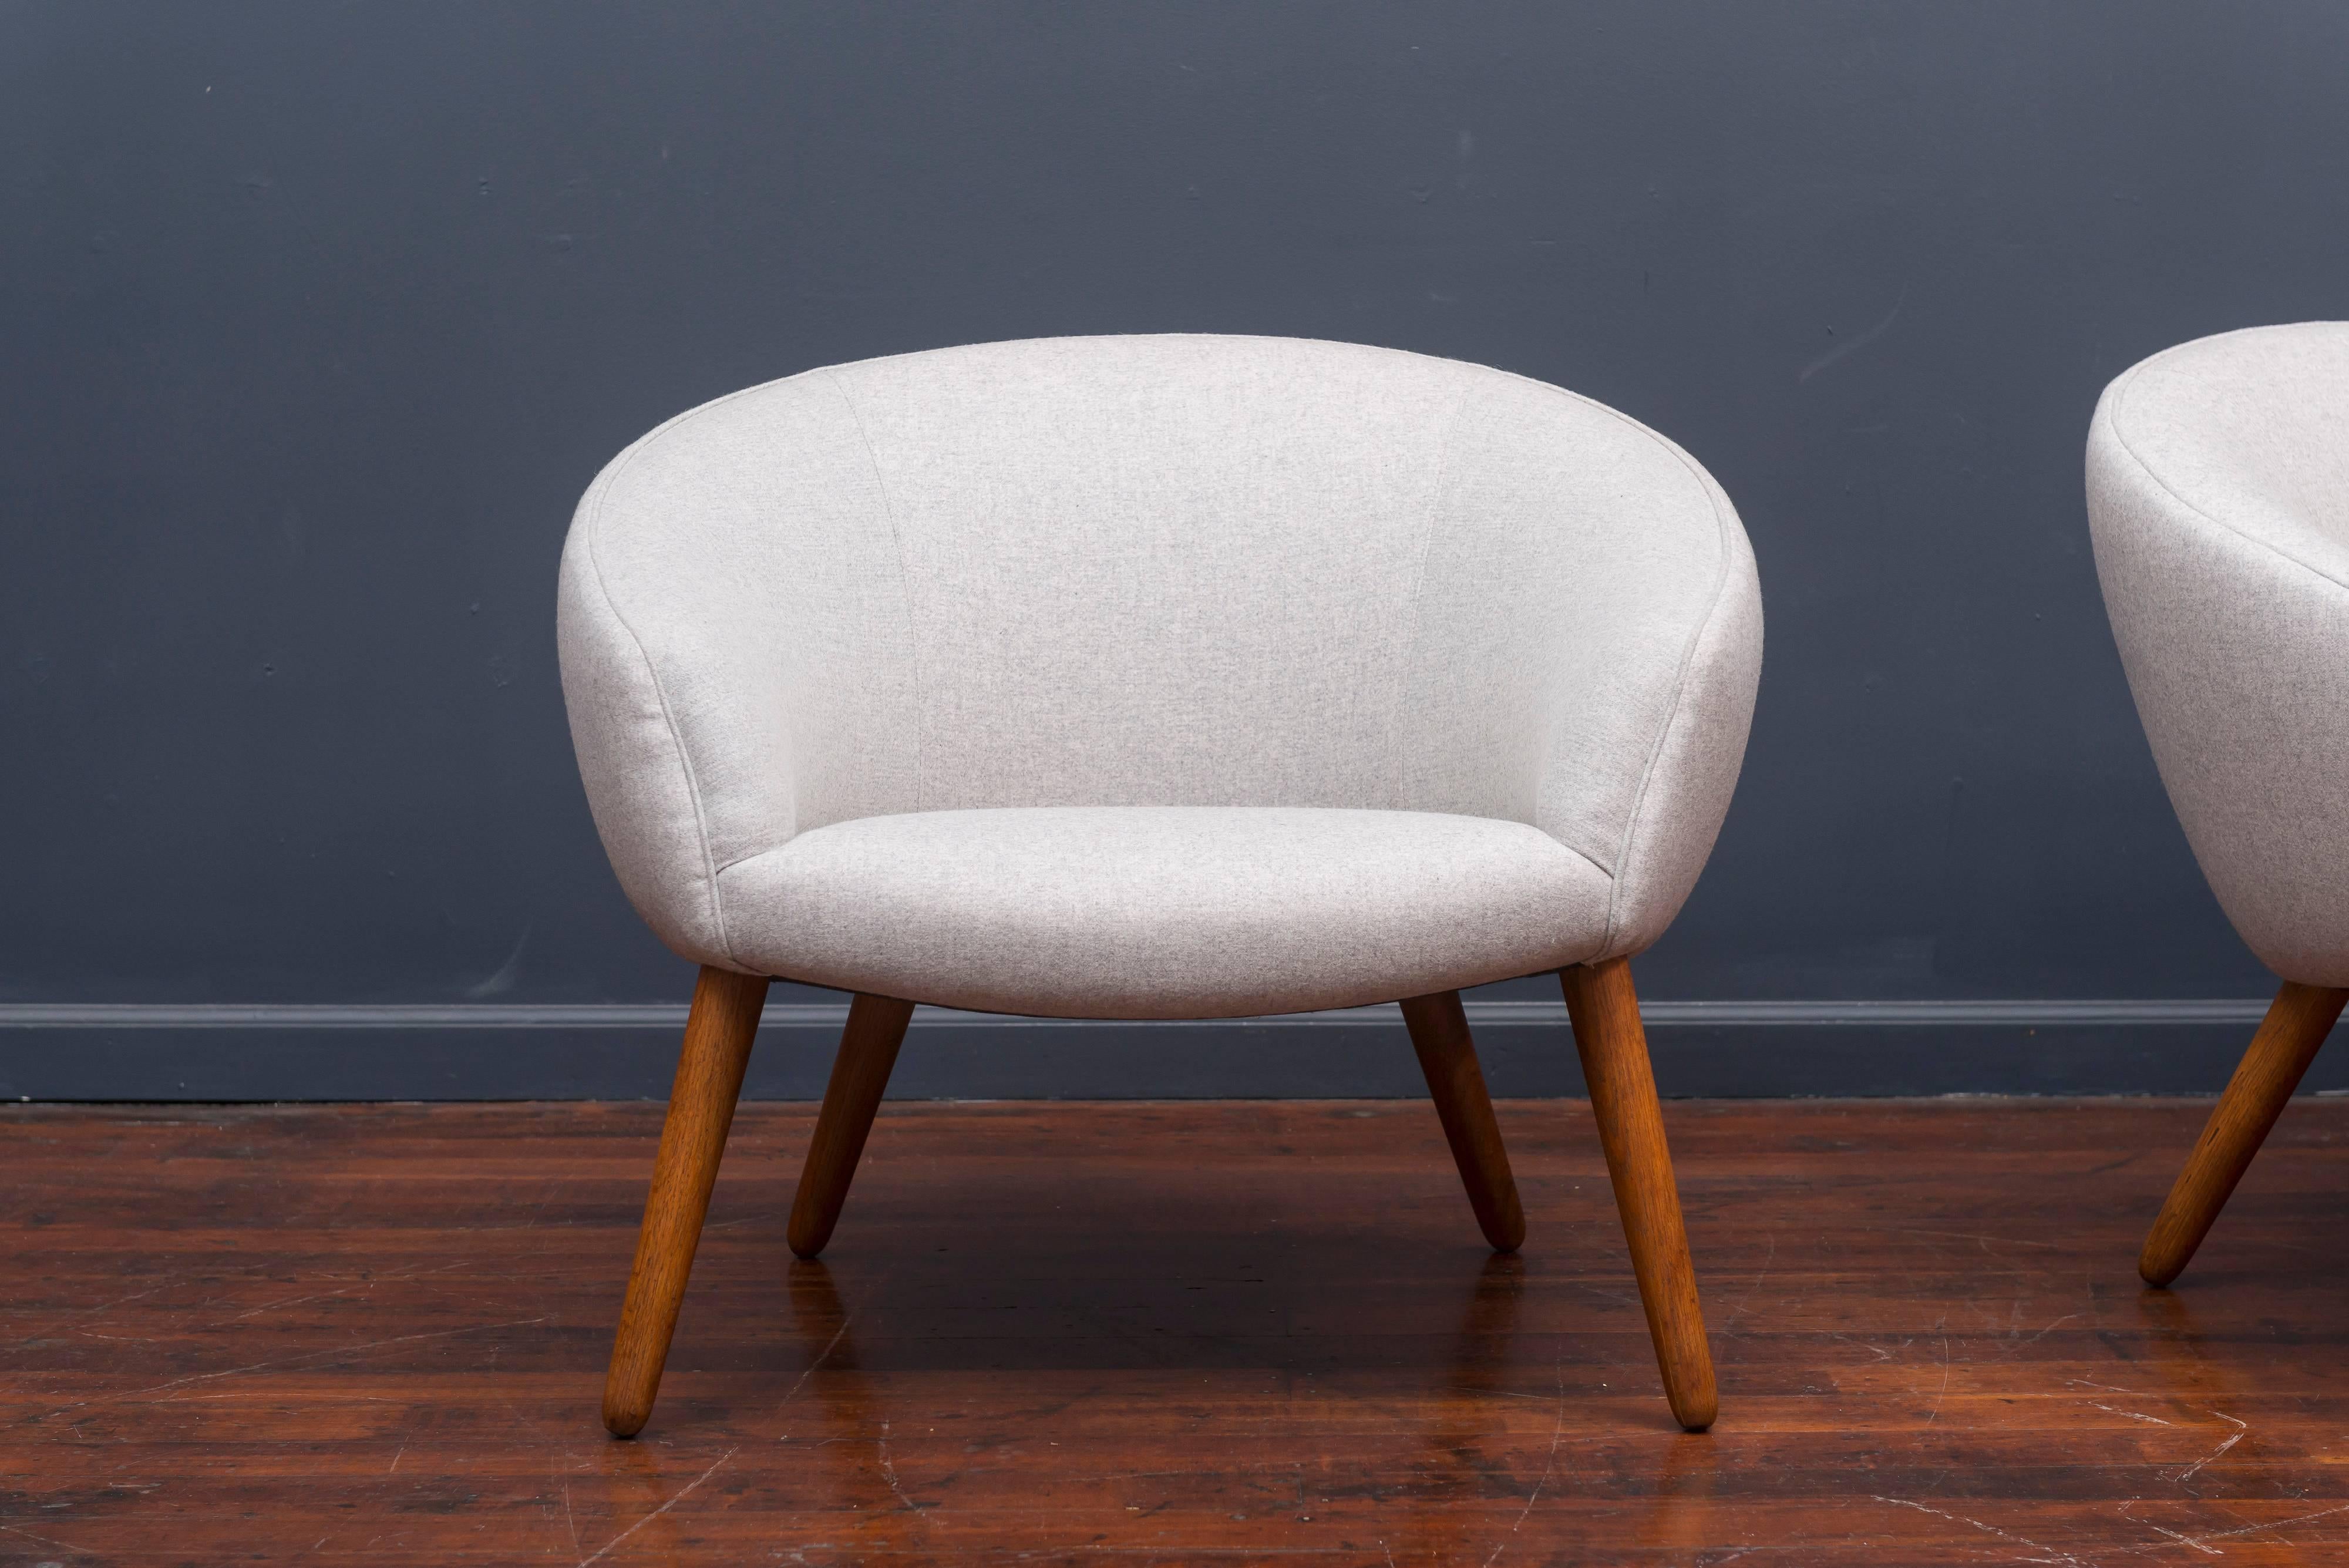 Nanna Ditzel model AP 26 lounge chairs made by AP Stolen, Denmark. Newly upholstered with oak legs, very comfy.